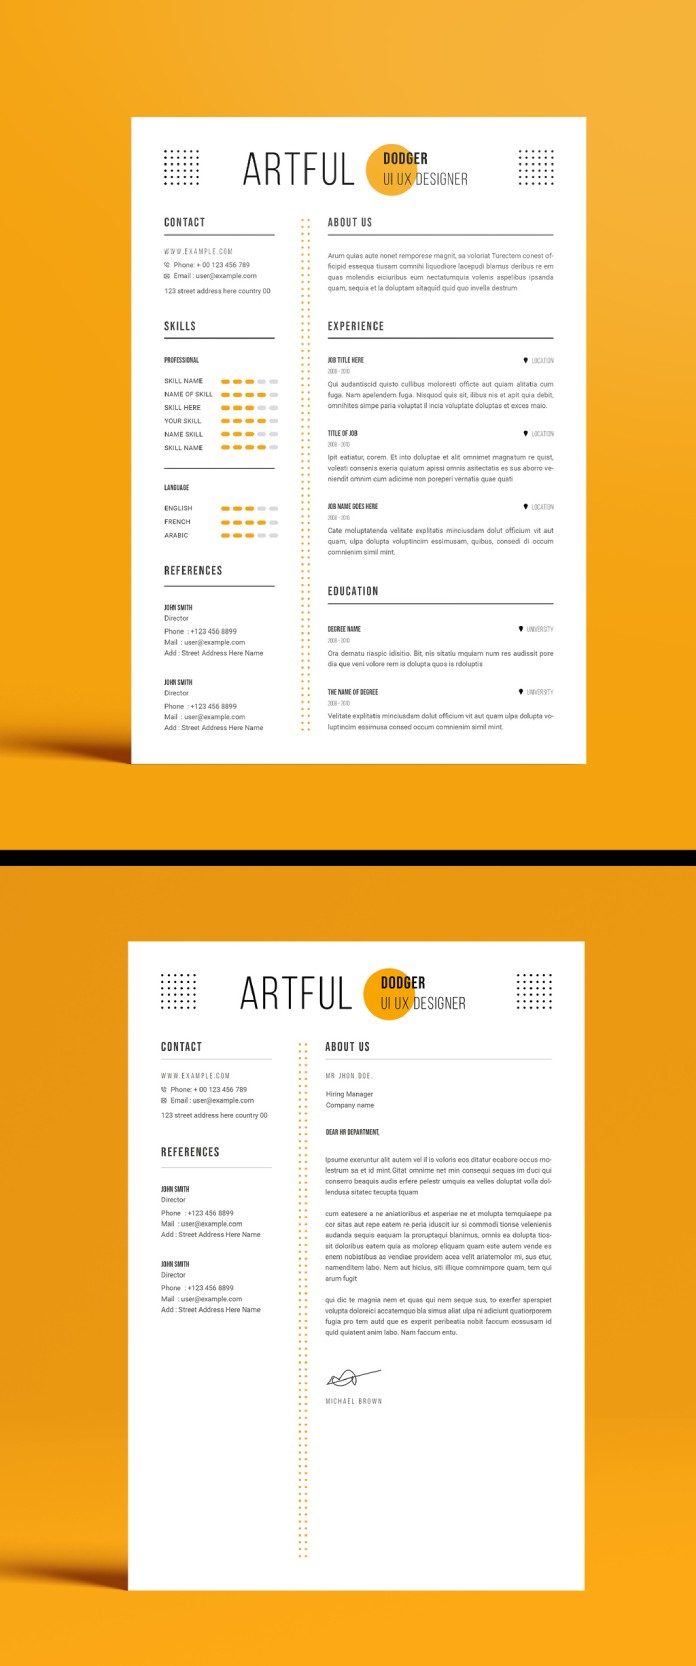 Download this Classic Resume and Cover Letter Templates Set by DesignCoach